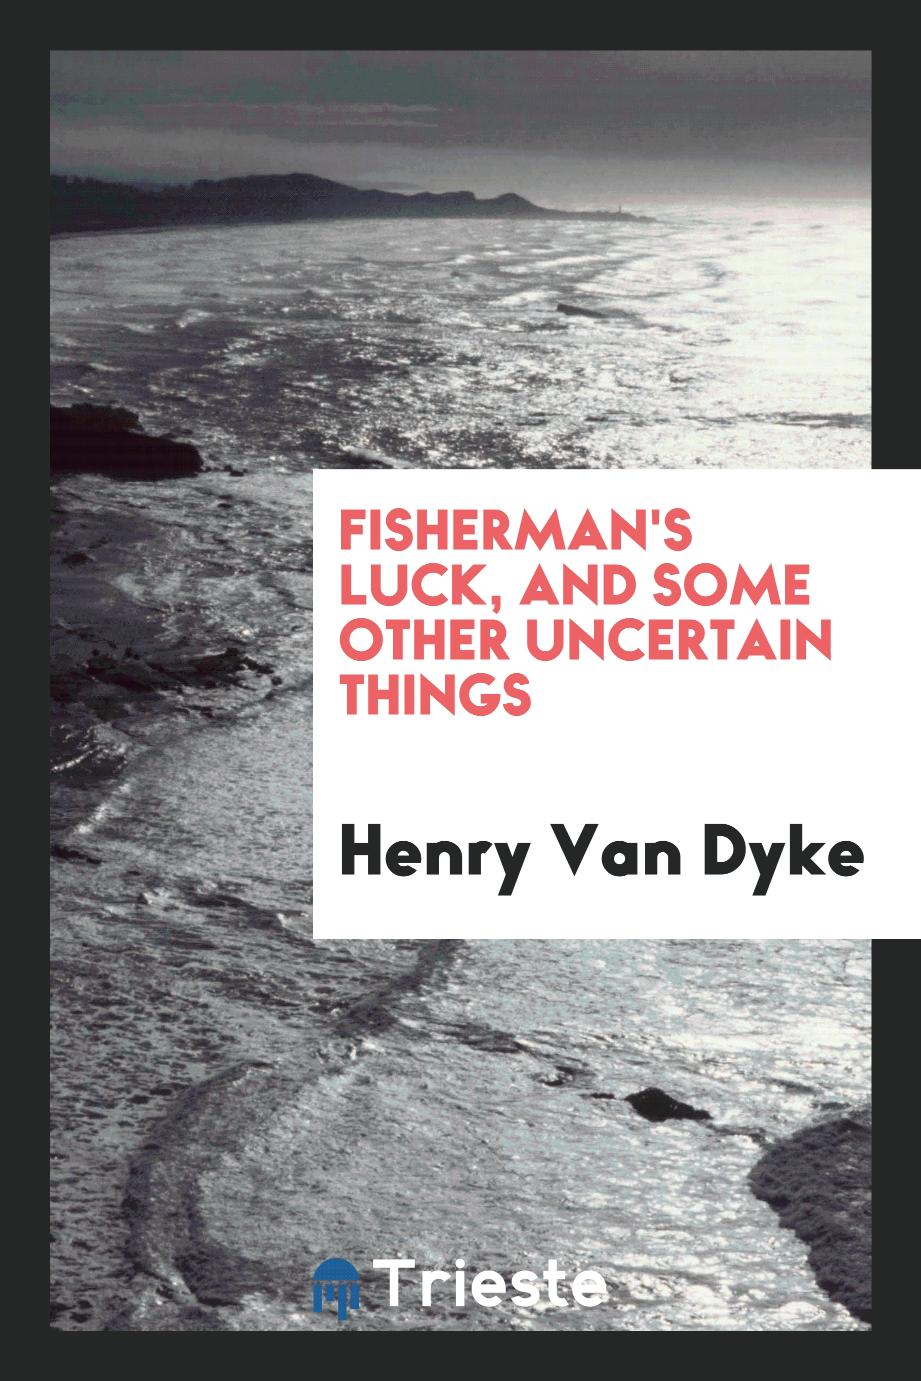 Fisherman's luck, and some other uncertain things